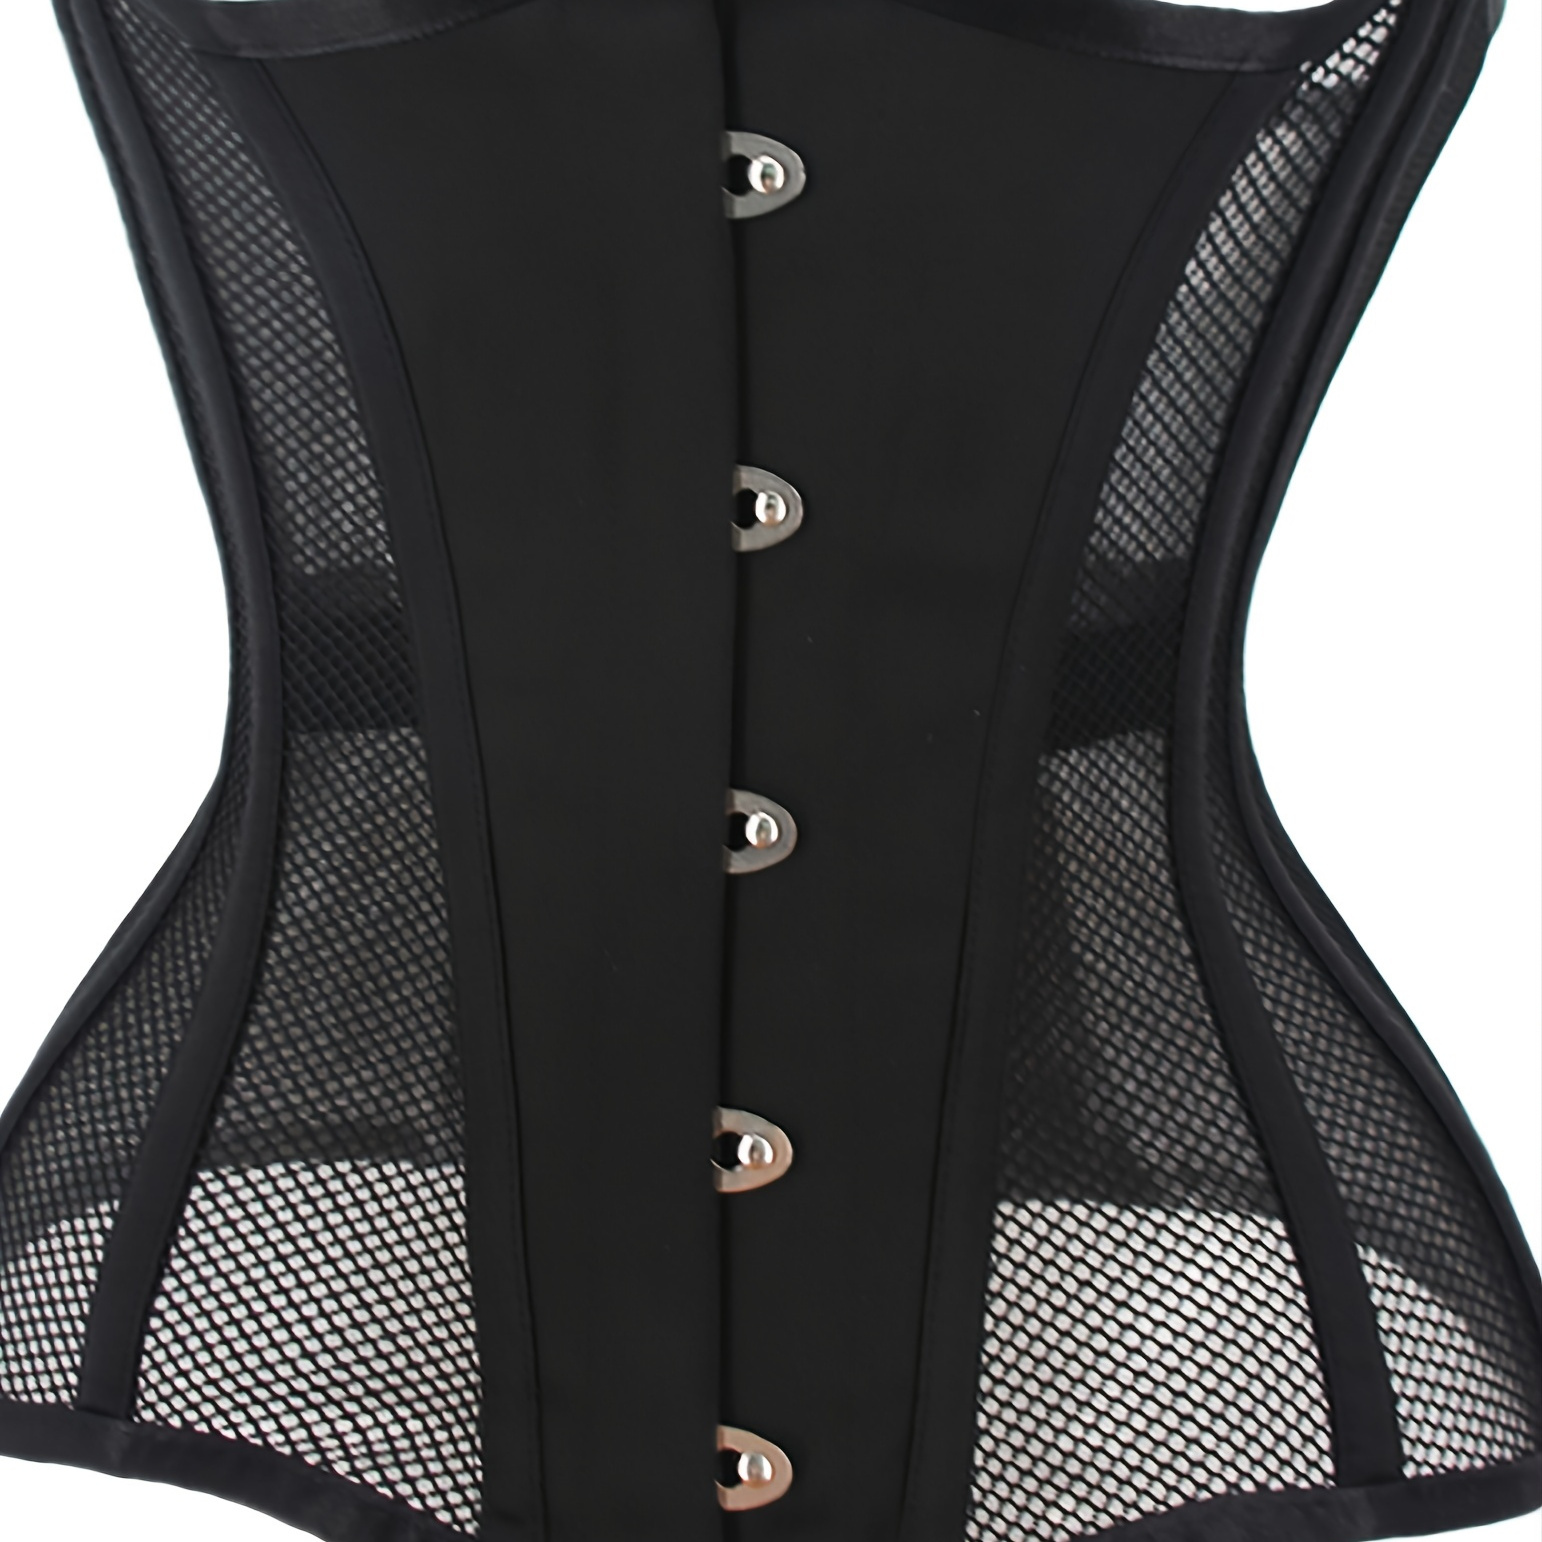 harmtty Smooth Waistline Body Waistband Multi Breasted Body Shaper  Underbust Painless Girdle Corset for Home